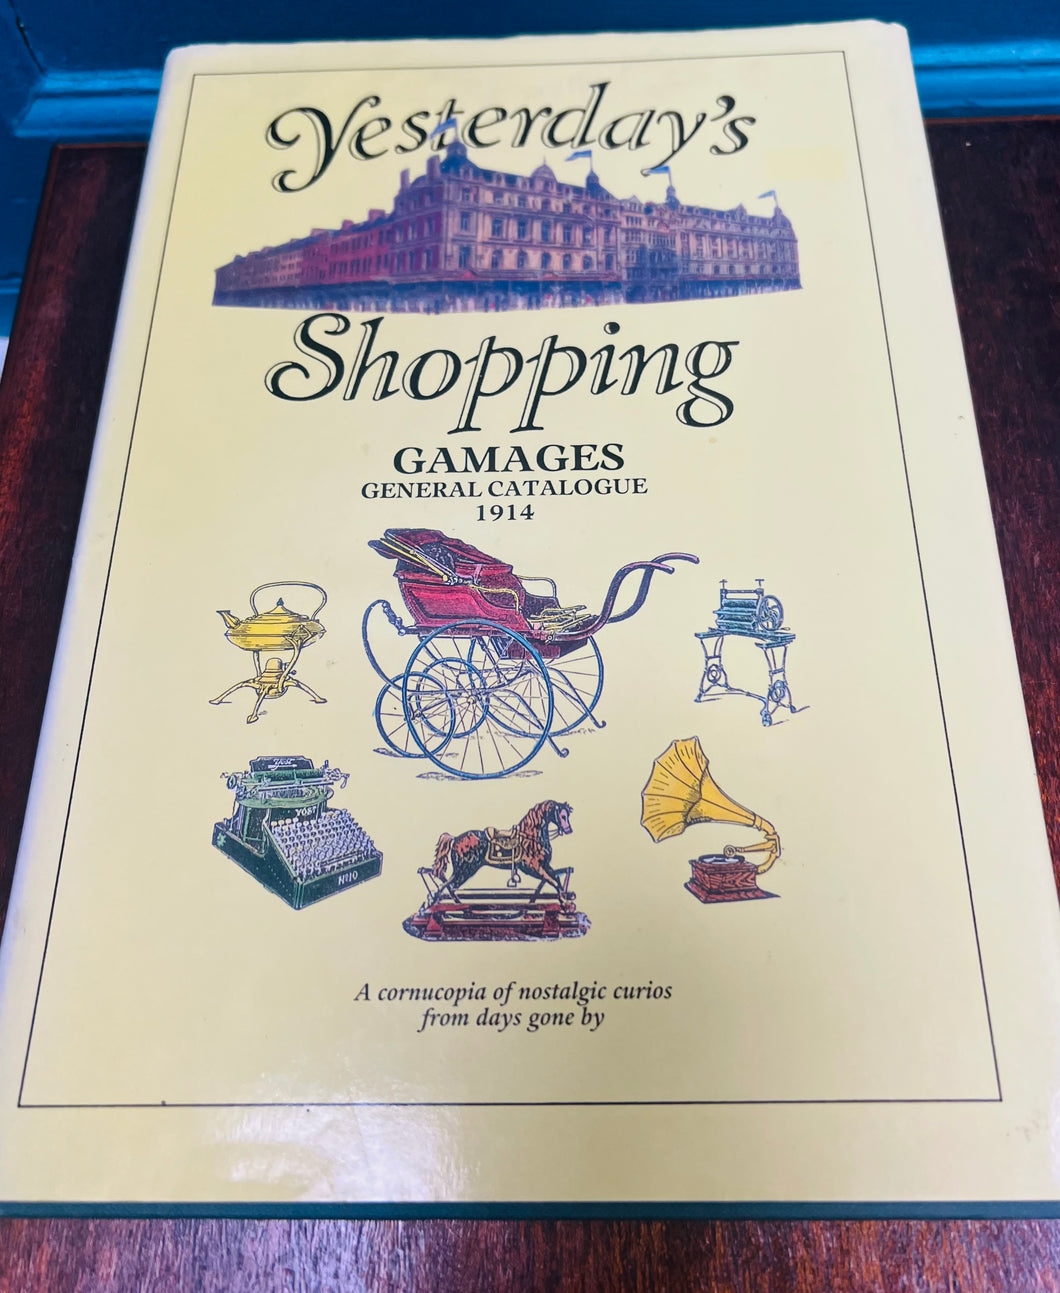 Llyfr ‘Yesterday’s Shopping’ - Catalog siop Gamages o 1914 / ‘Yesterday’s Shopping’ book - Gamages shop catalogue from 1914